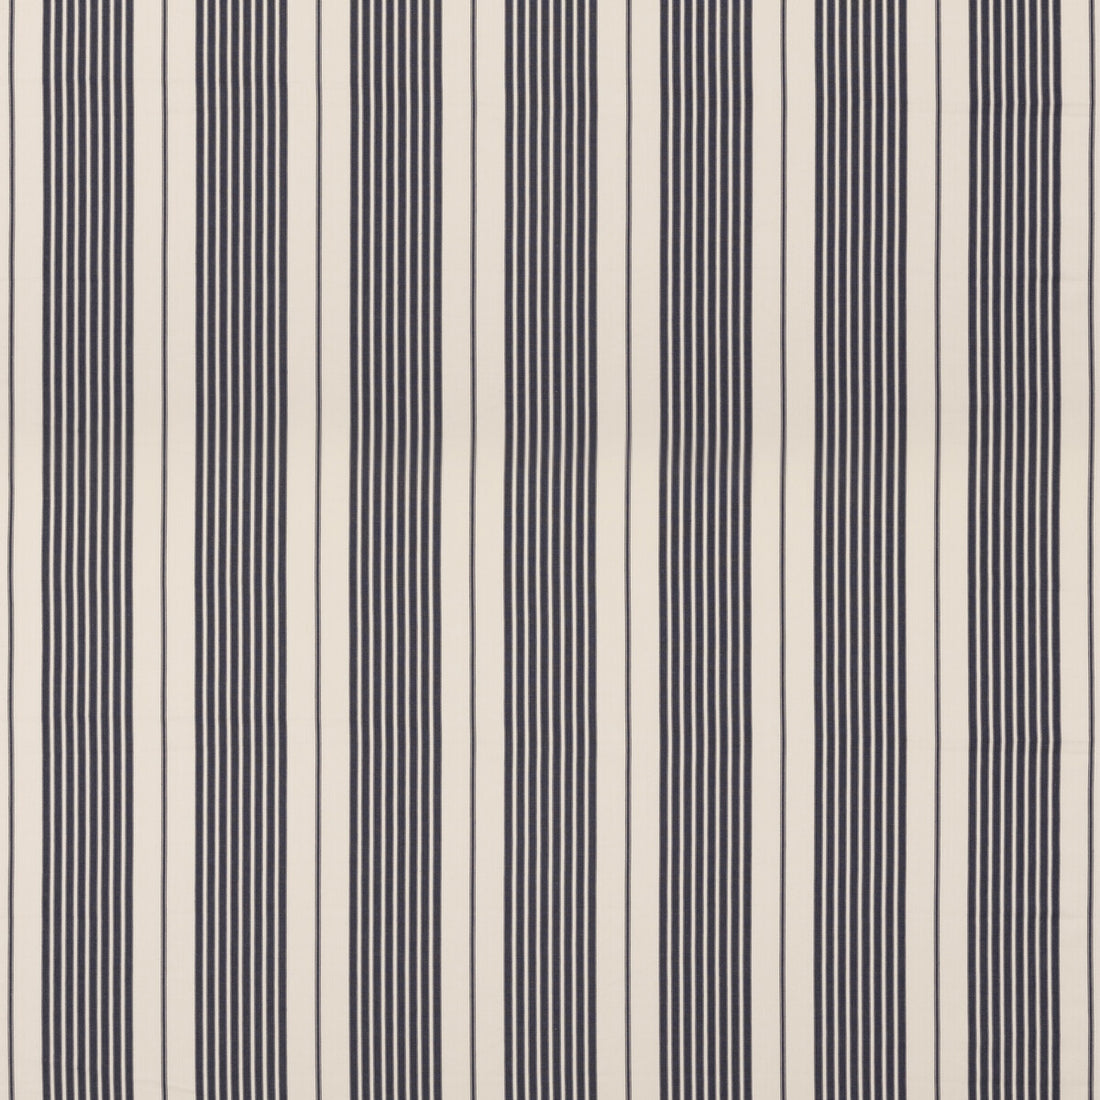 Cliff Stripe fabric in indigo color - pattern FD833.H10.0 - by Mulberry in the Westerly Stripes collection